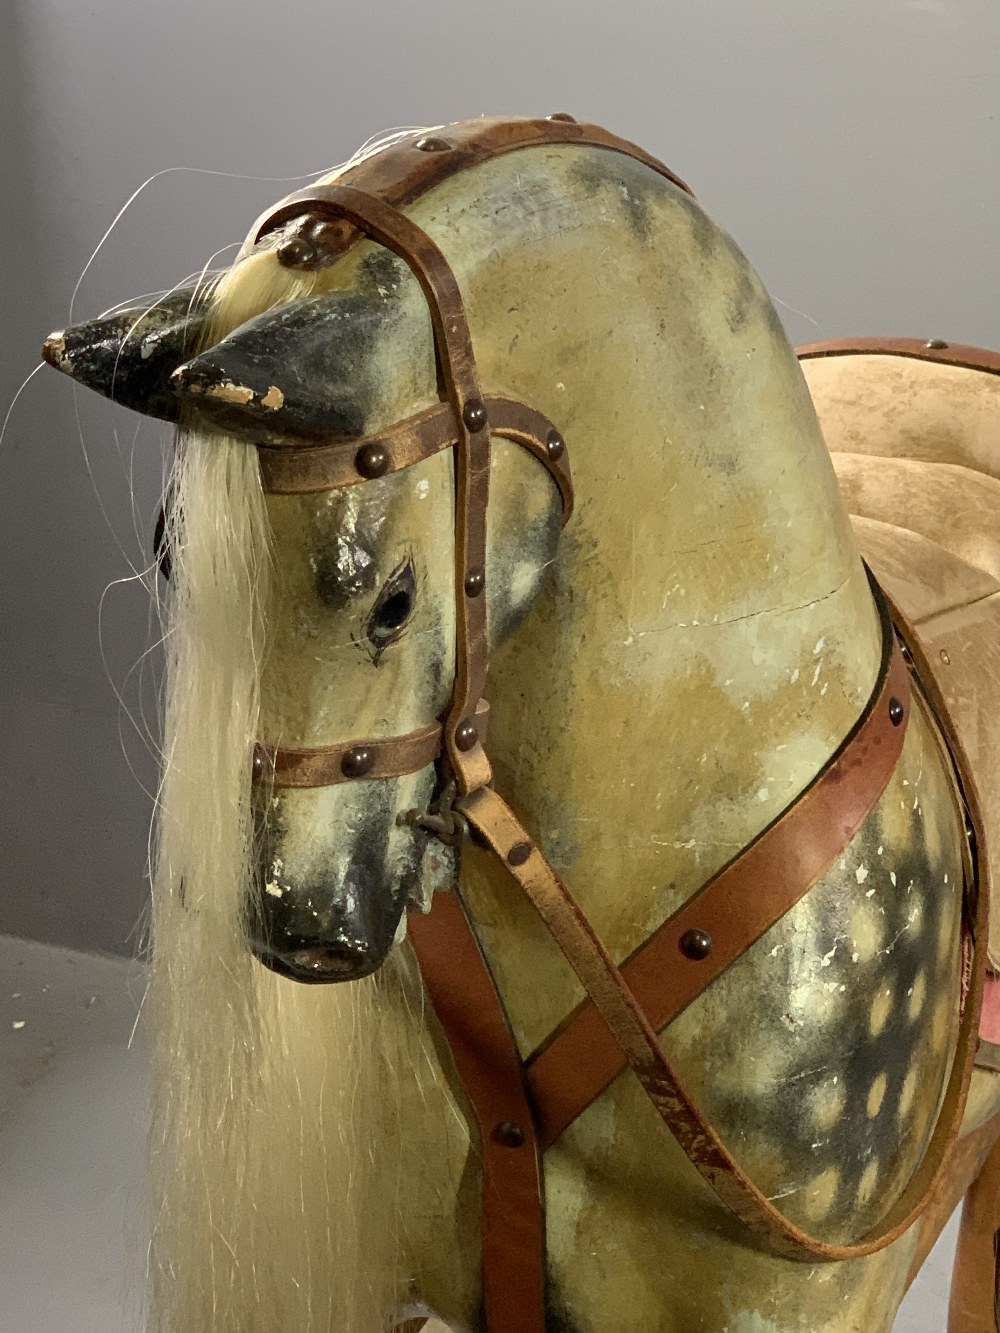 VICTORIAN DAPPLE GREY ROCKING HORSE by G & J Lines, patented January 29, 1880, believed to be the ' - Image 6 of 9